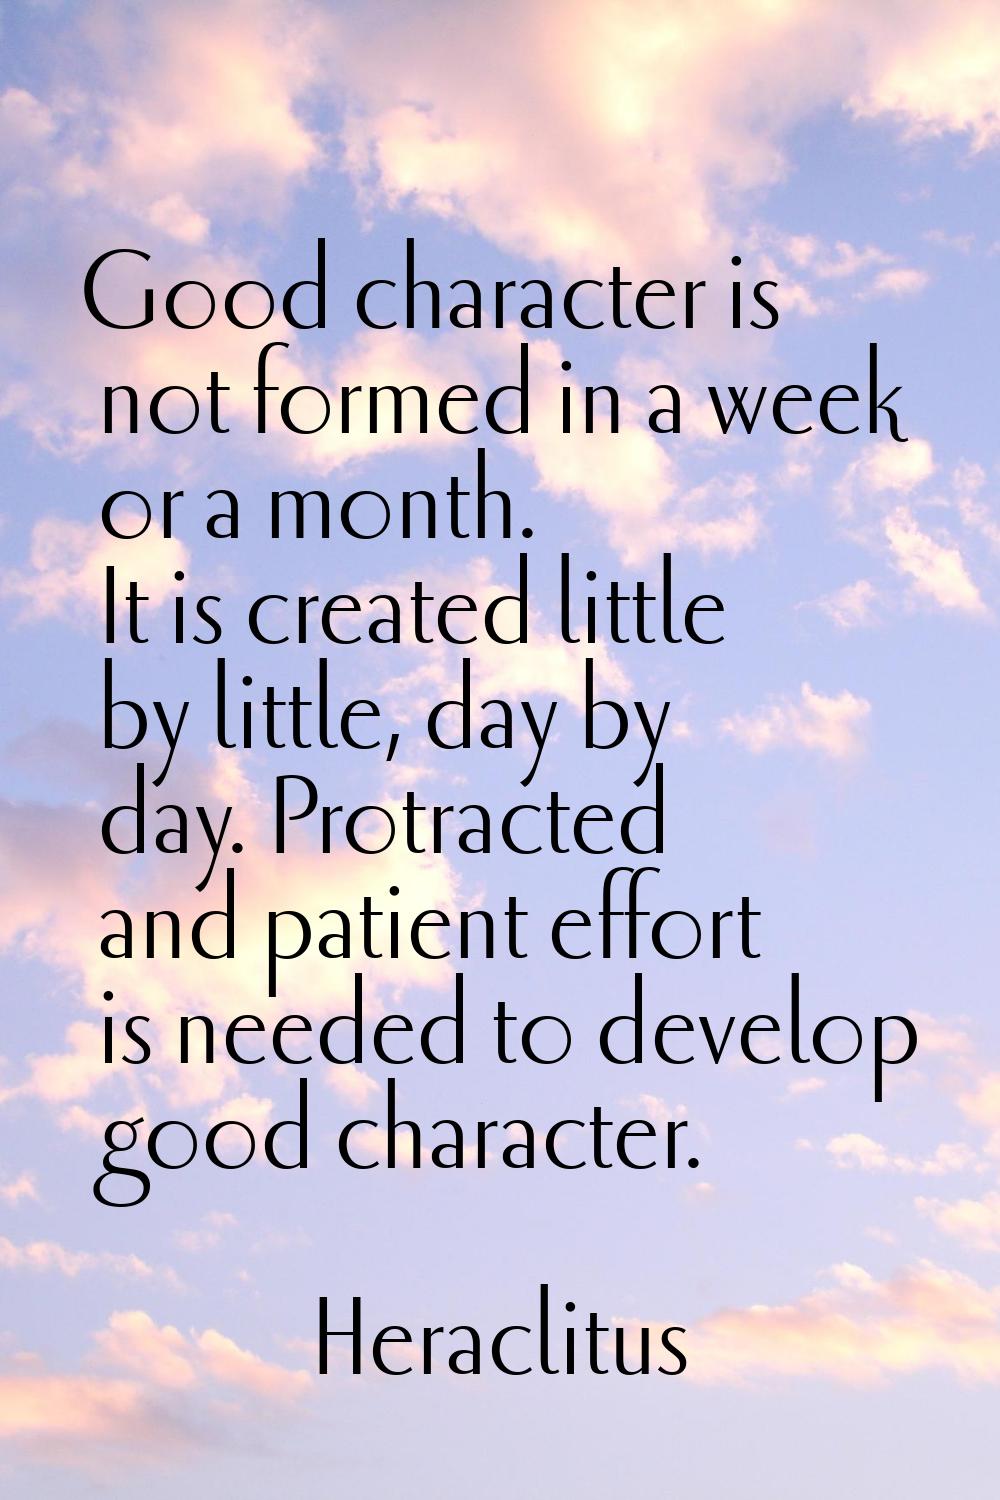 Good character is not formed in a week or a month. It is created little by little, day by day. Prot